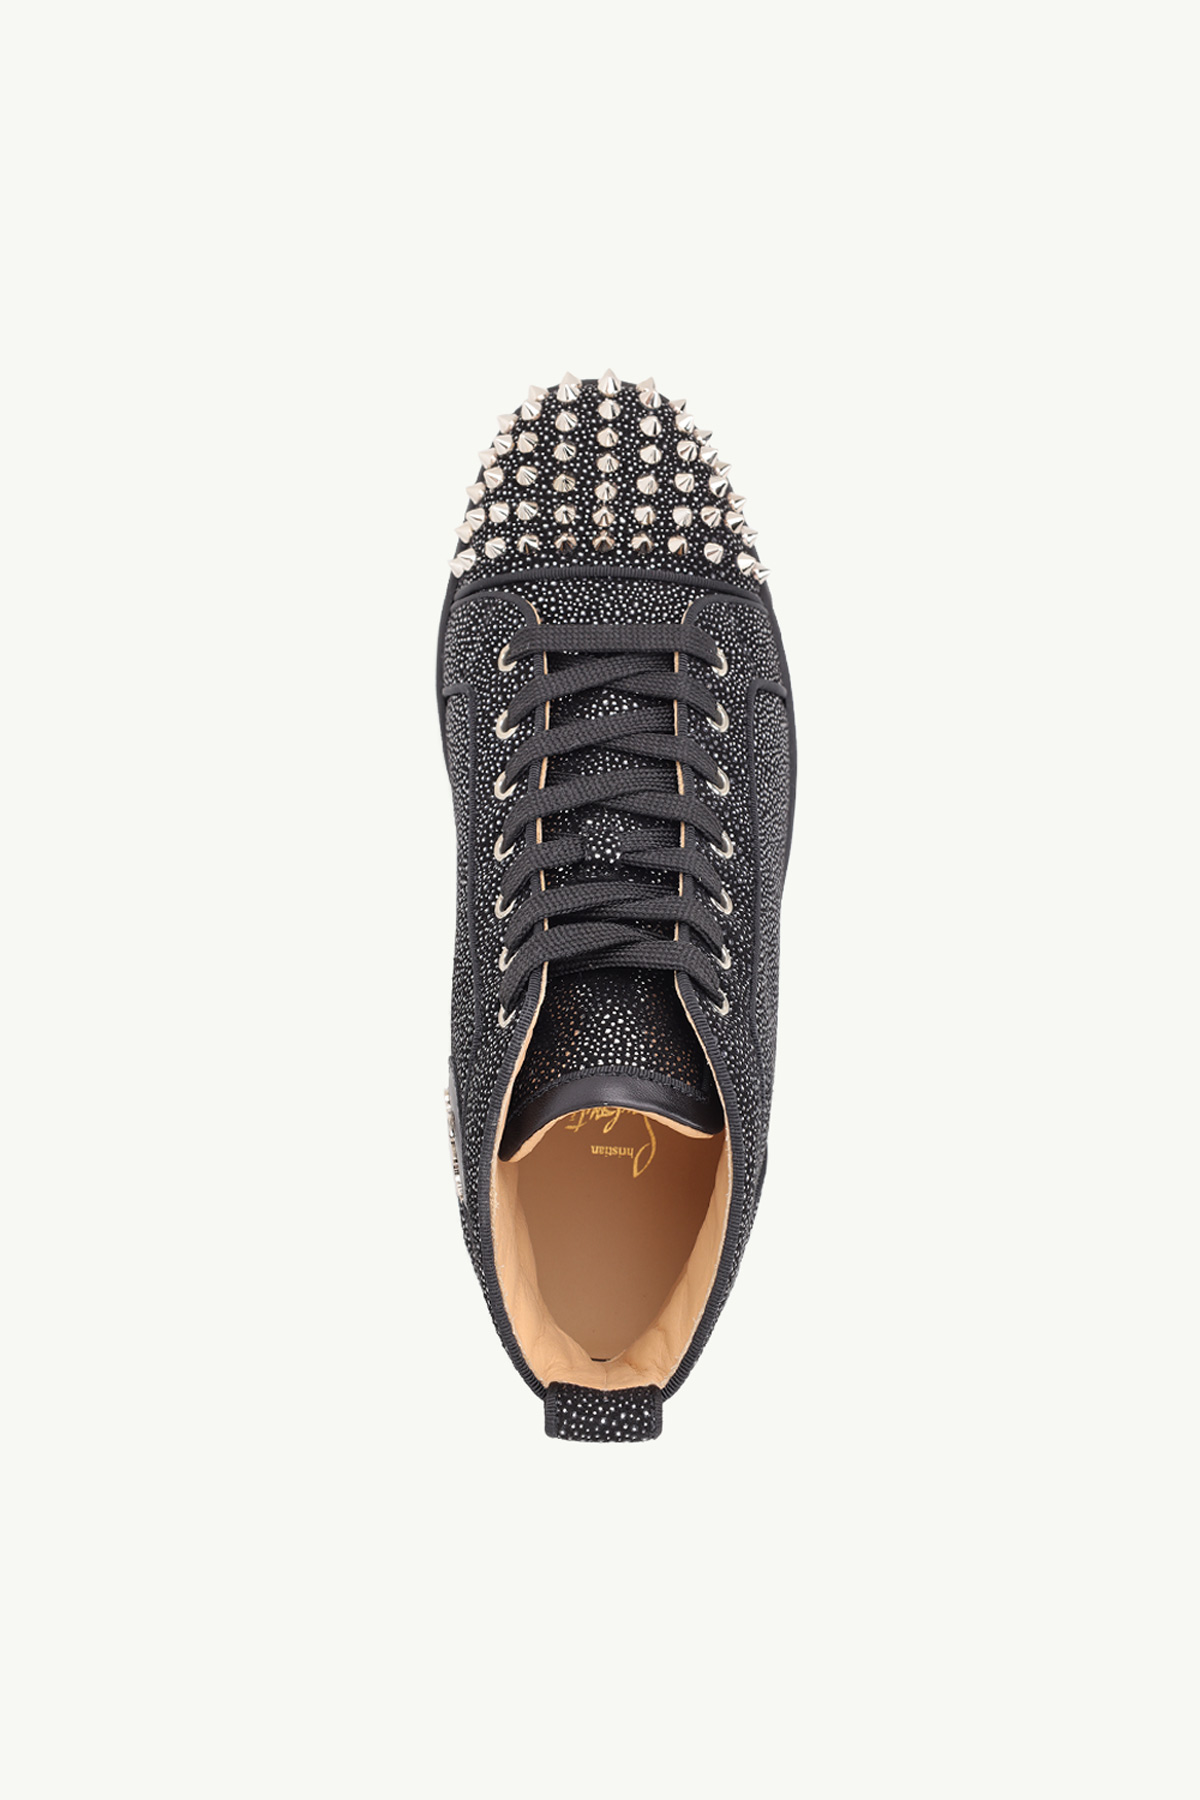 CHRISTIAN LOUBOUTIN Men Lou Spikes Orlato High Top Sneakers in Version Black Creative Leather 3